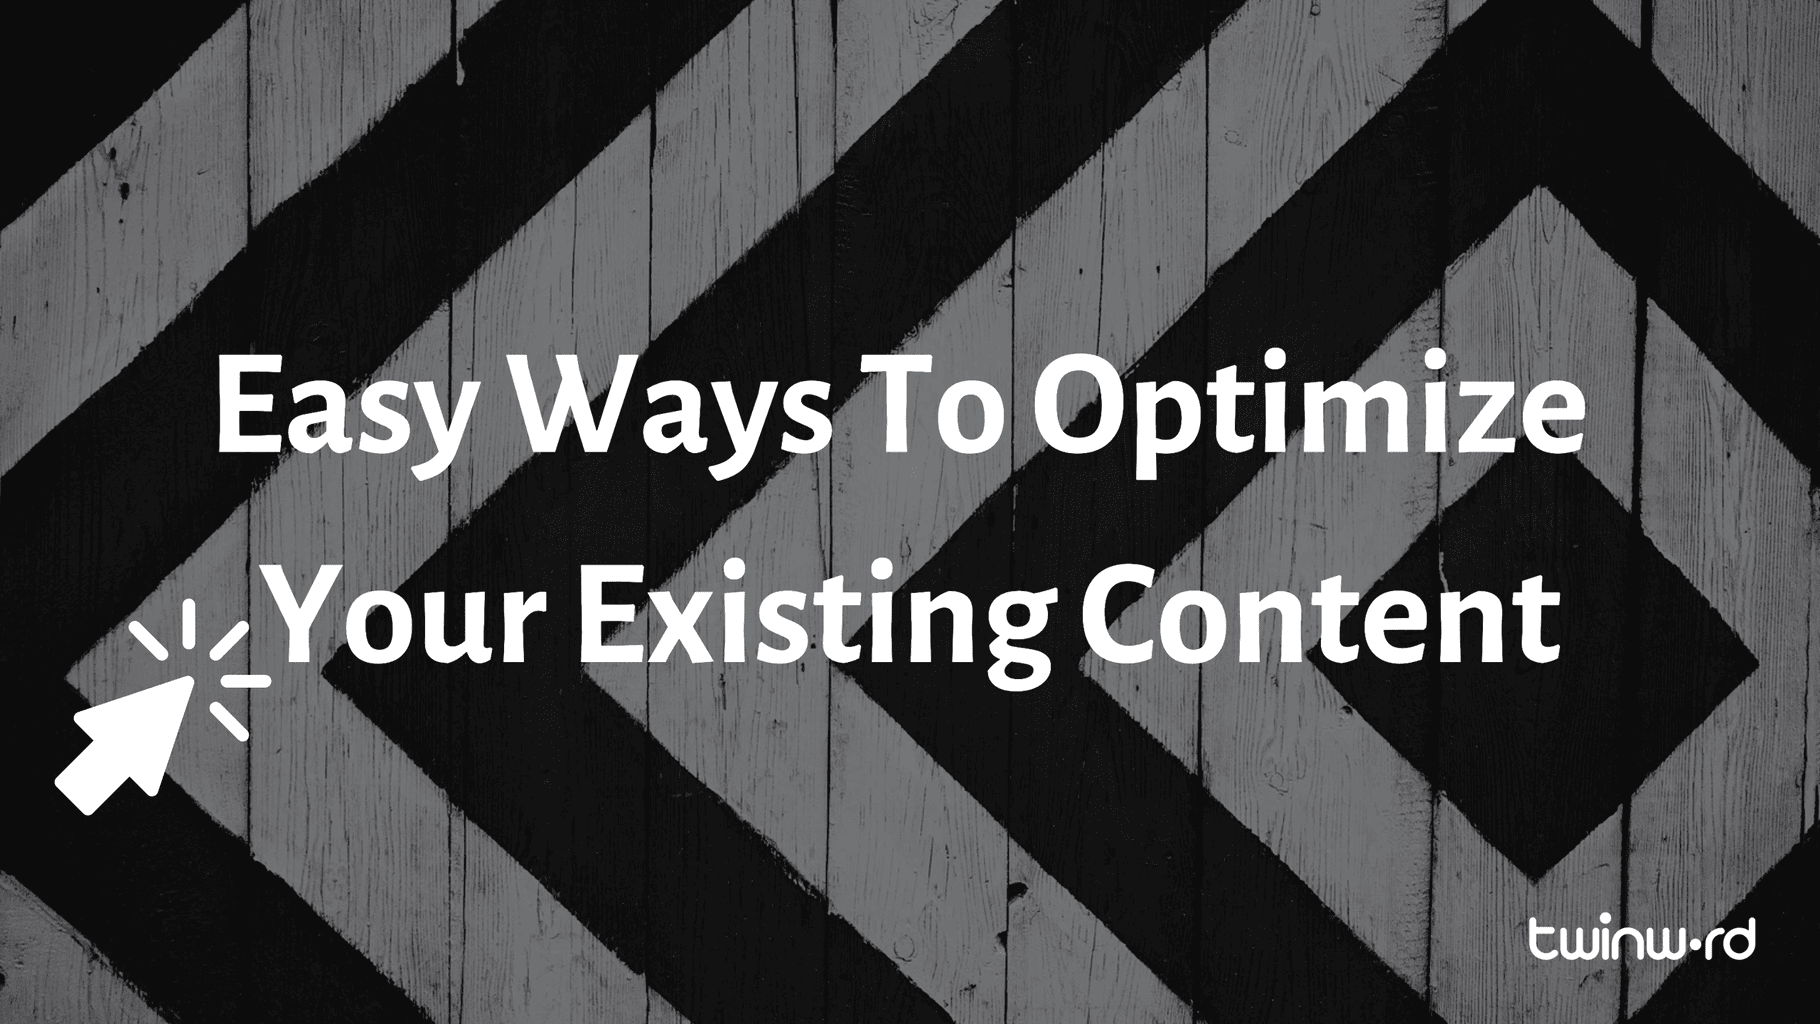 Easy Ways To Optimize Your Existing Content